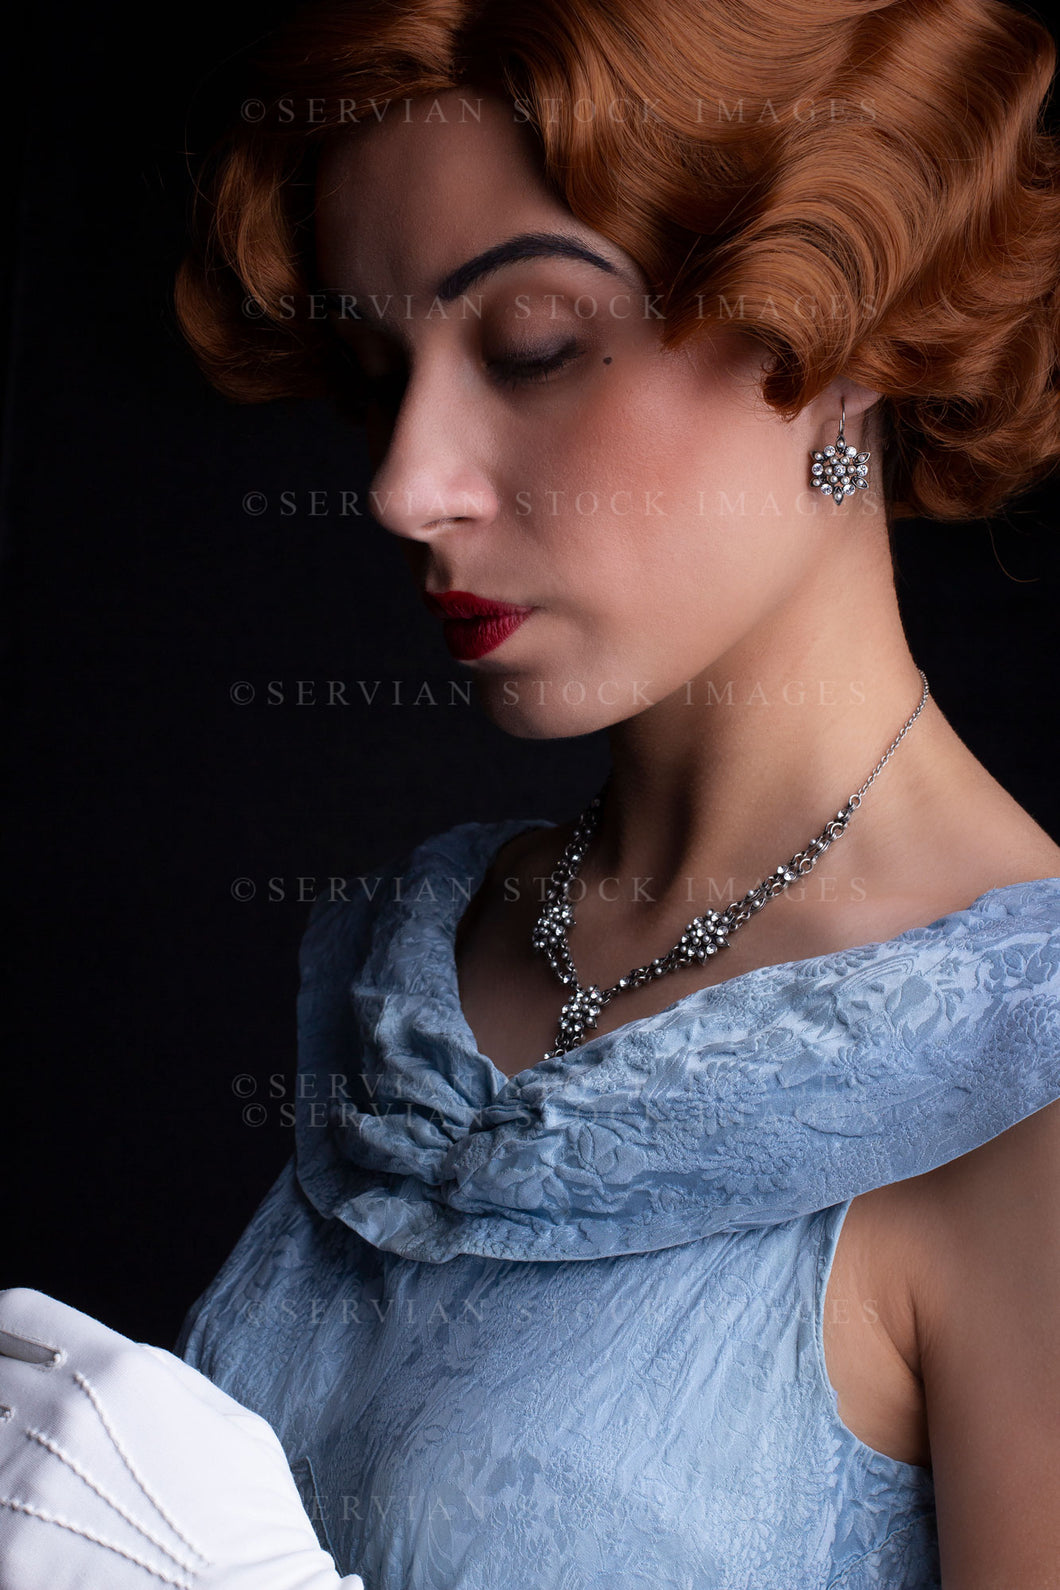 1930s woman wearing a blue vintage dress, long white gloves, and a diamante necklace against a black backdrop.(Sarah 0235)